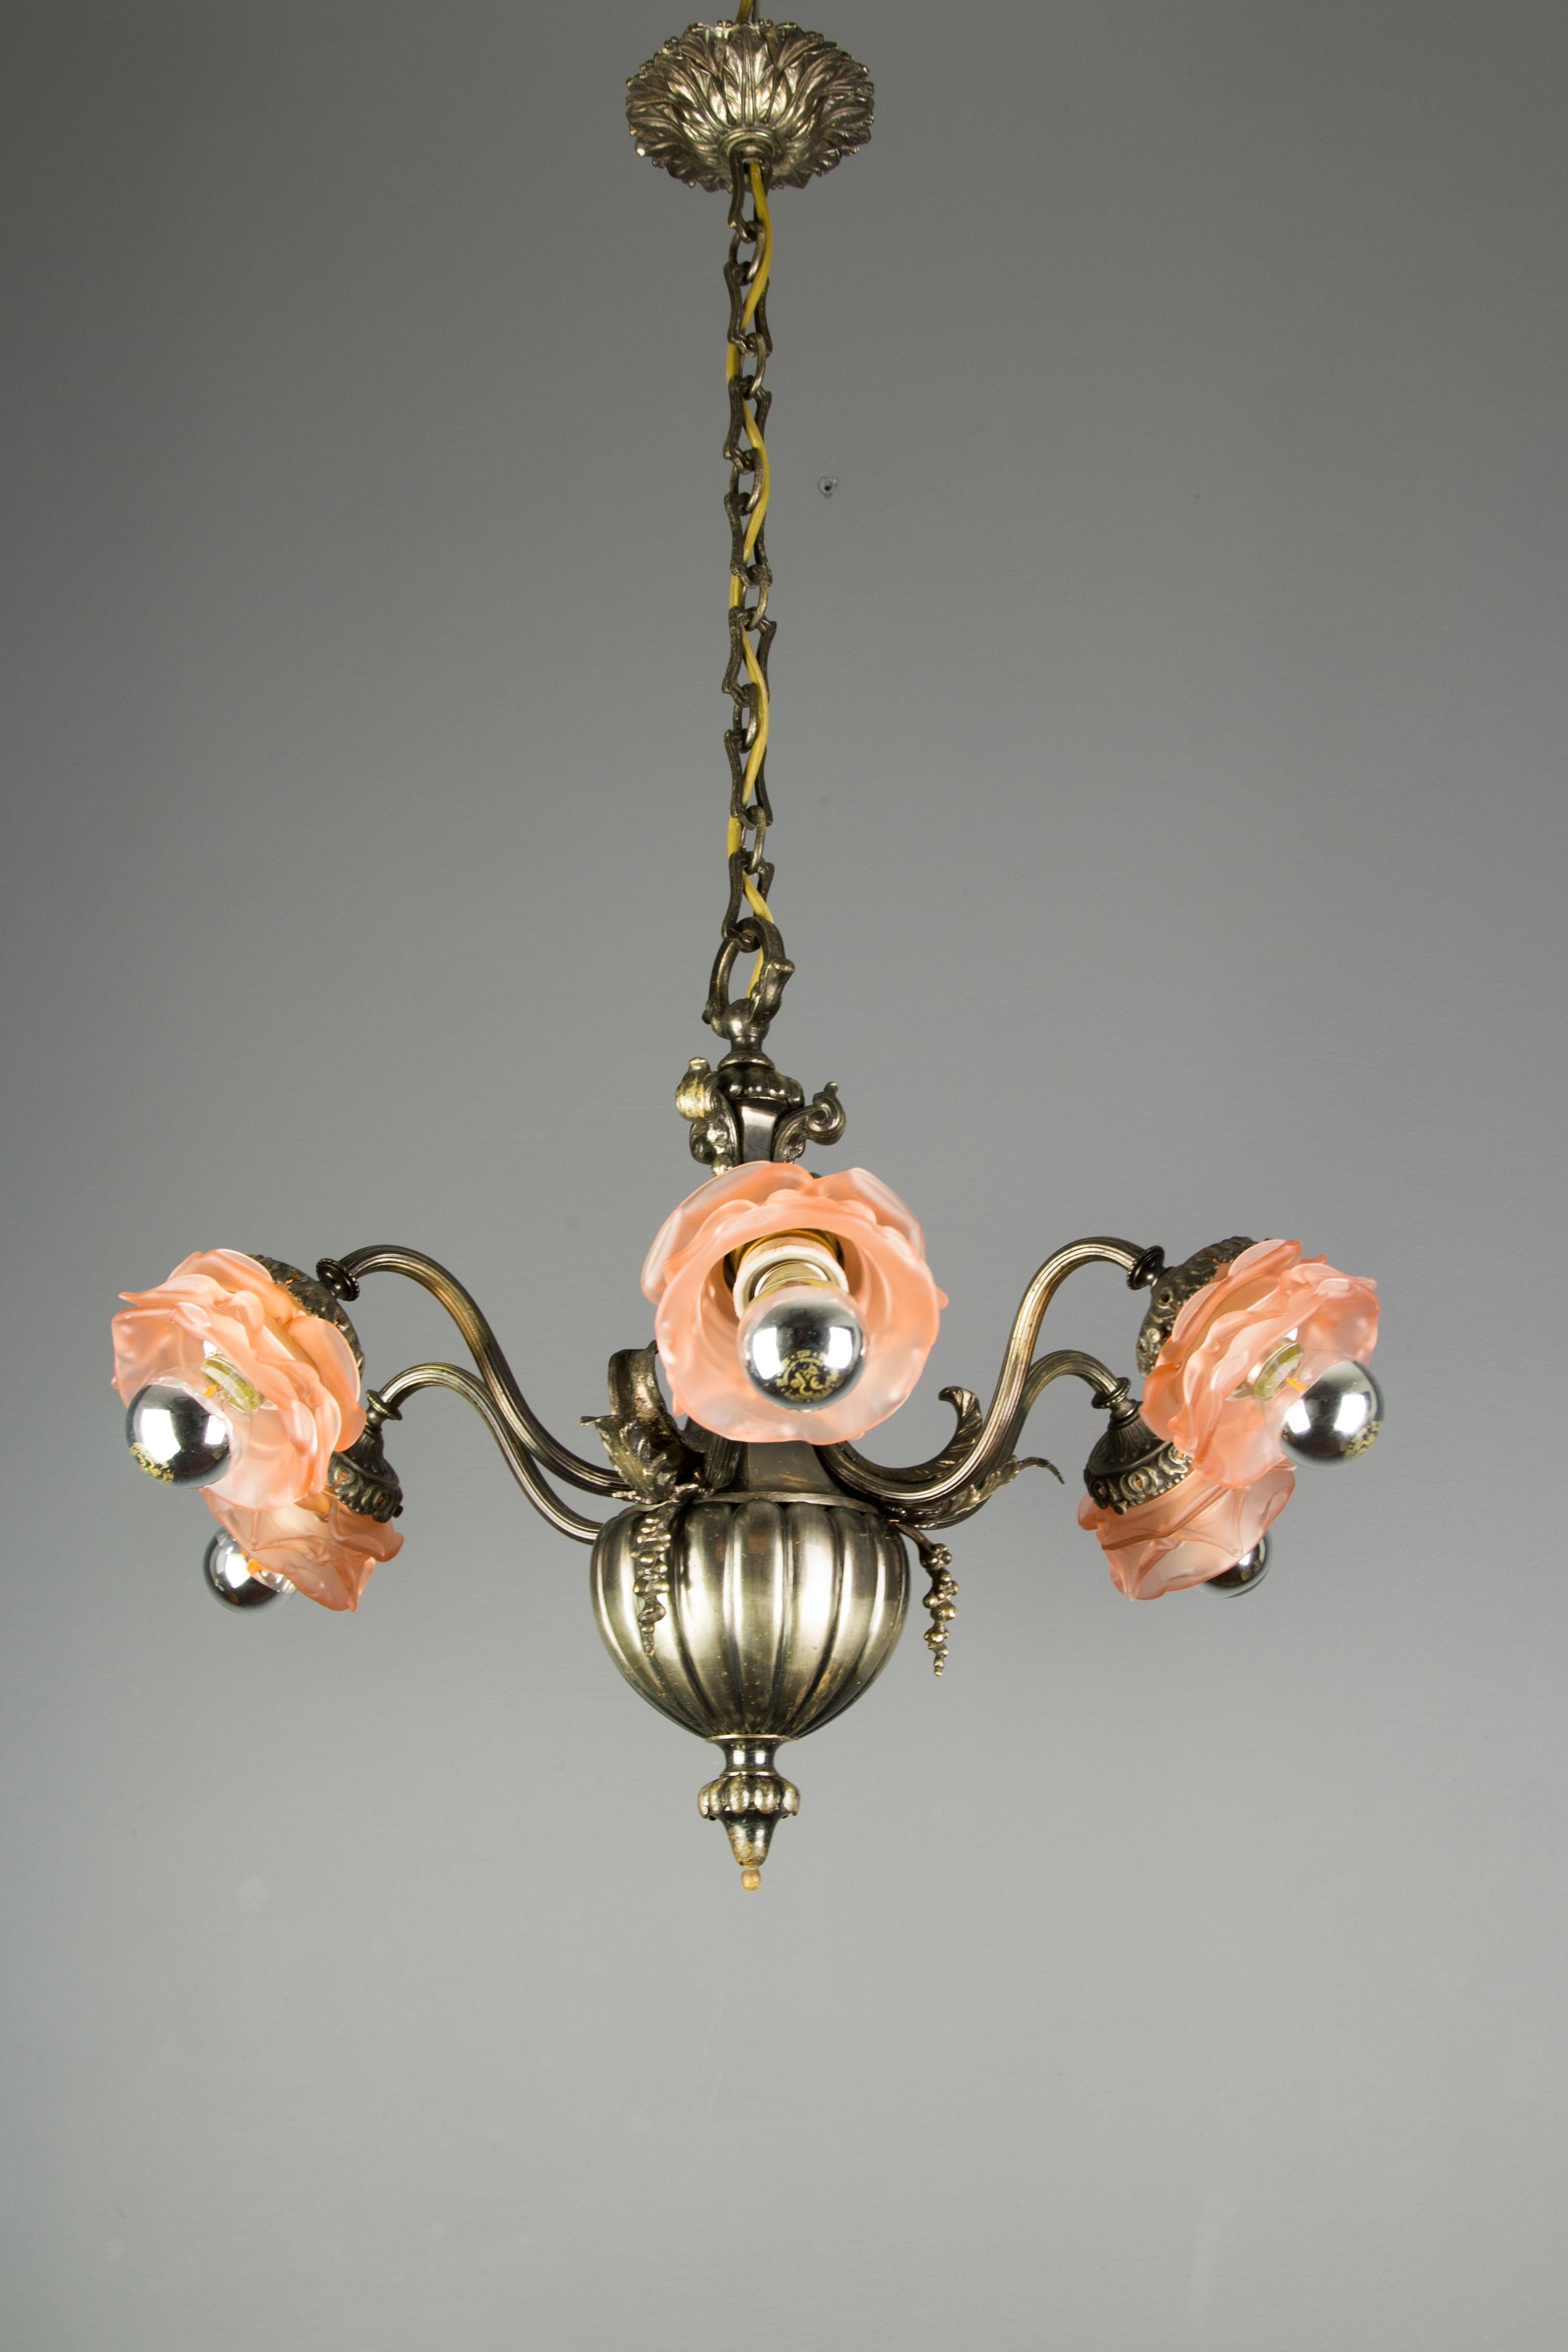 Beautiful silver color bronze and brass six-arm chandelier, each arm with pink floral-shaped frosted glass shade with one socket for E27 size light bulb. France, 1920s.
Dimensions: diameter 55 cm / 21.65 in; height 80 cm / 31.49 in.
The light